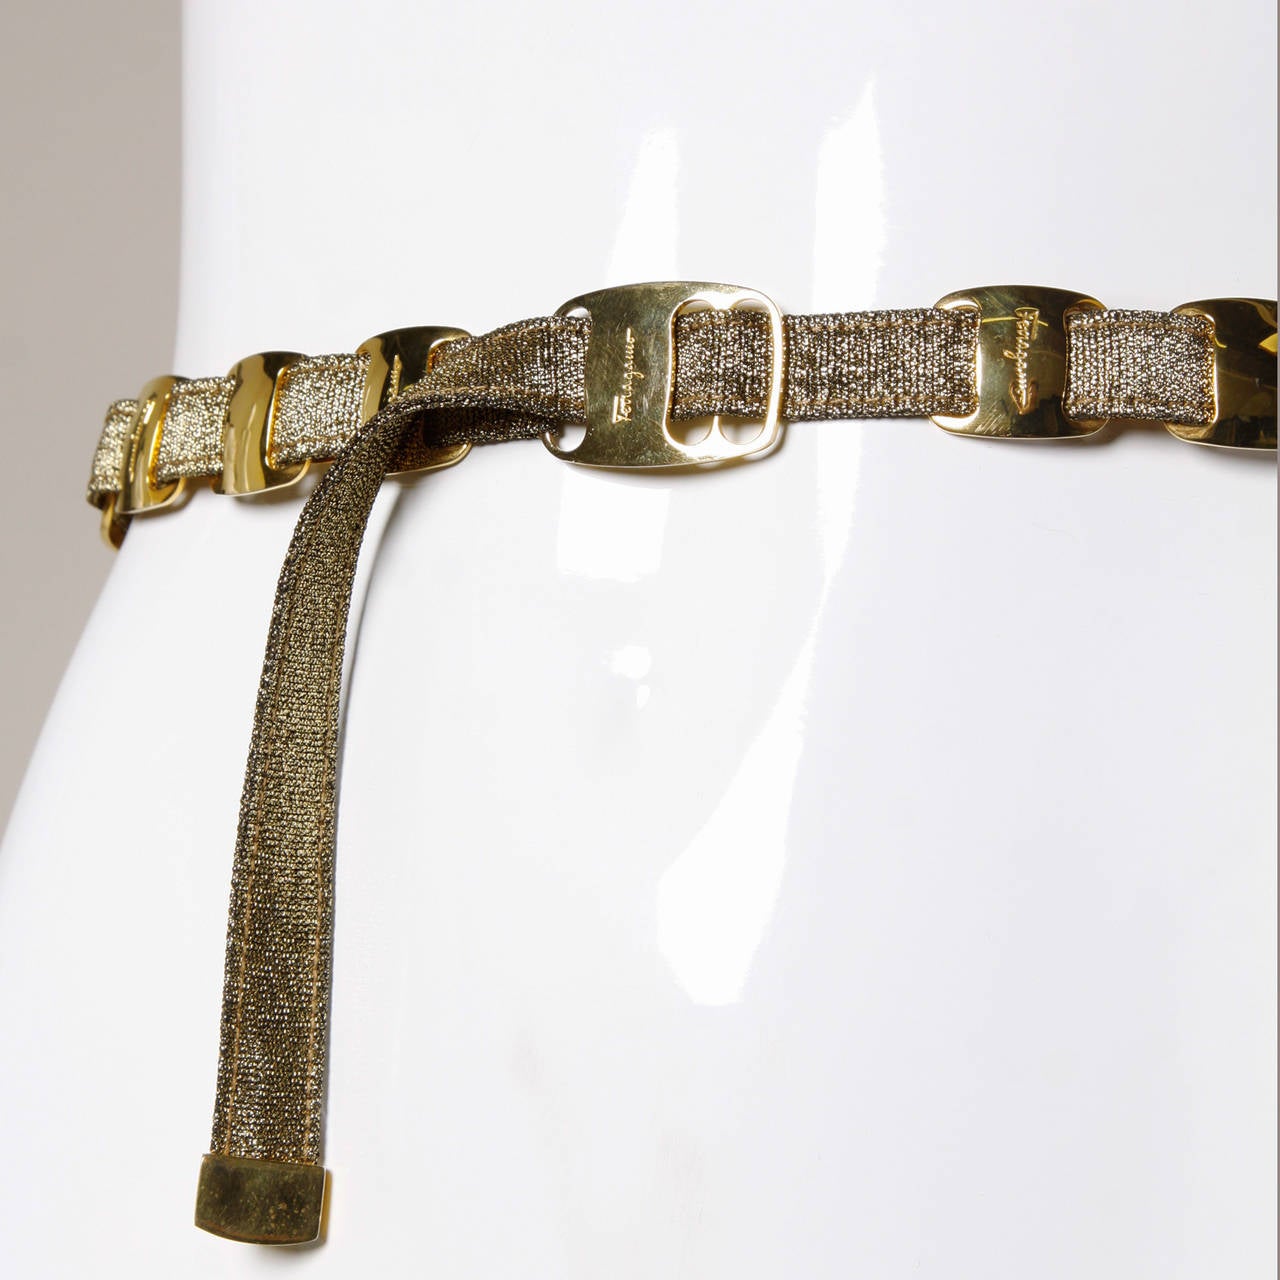 Vintage Salvatore Ferragamo metallic gold belt with heavy gold tone links that are signed Ferragamo. Fully adjustable.

Details:

Unlined
Adjustable Front Buckle Closure
Marked Size: Not Marked (Adjustable)
Color: Gold Metallic
Materials: